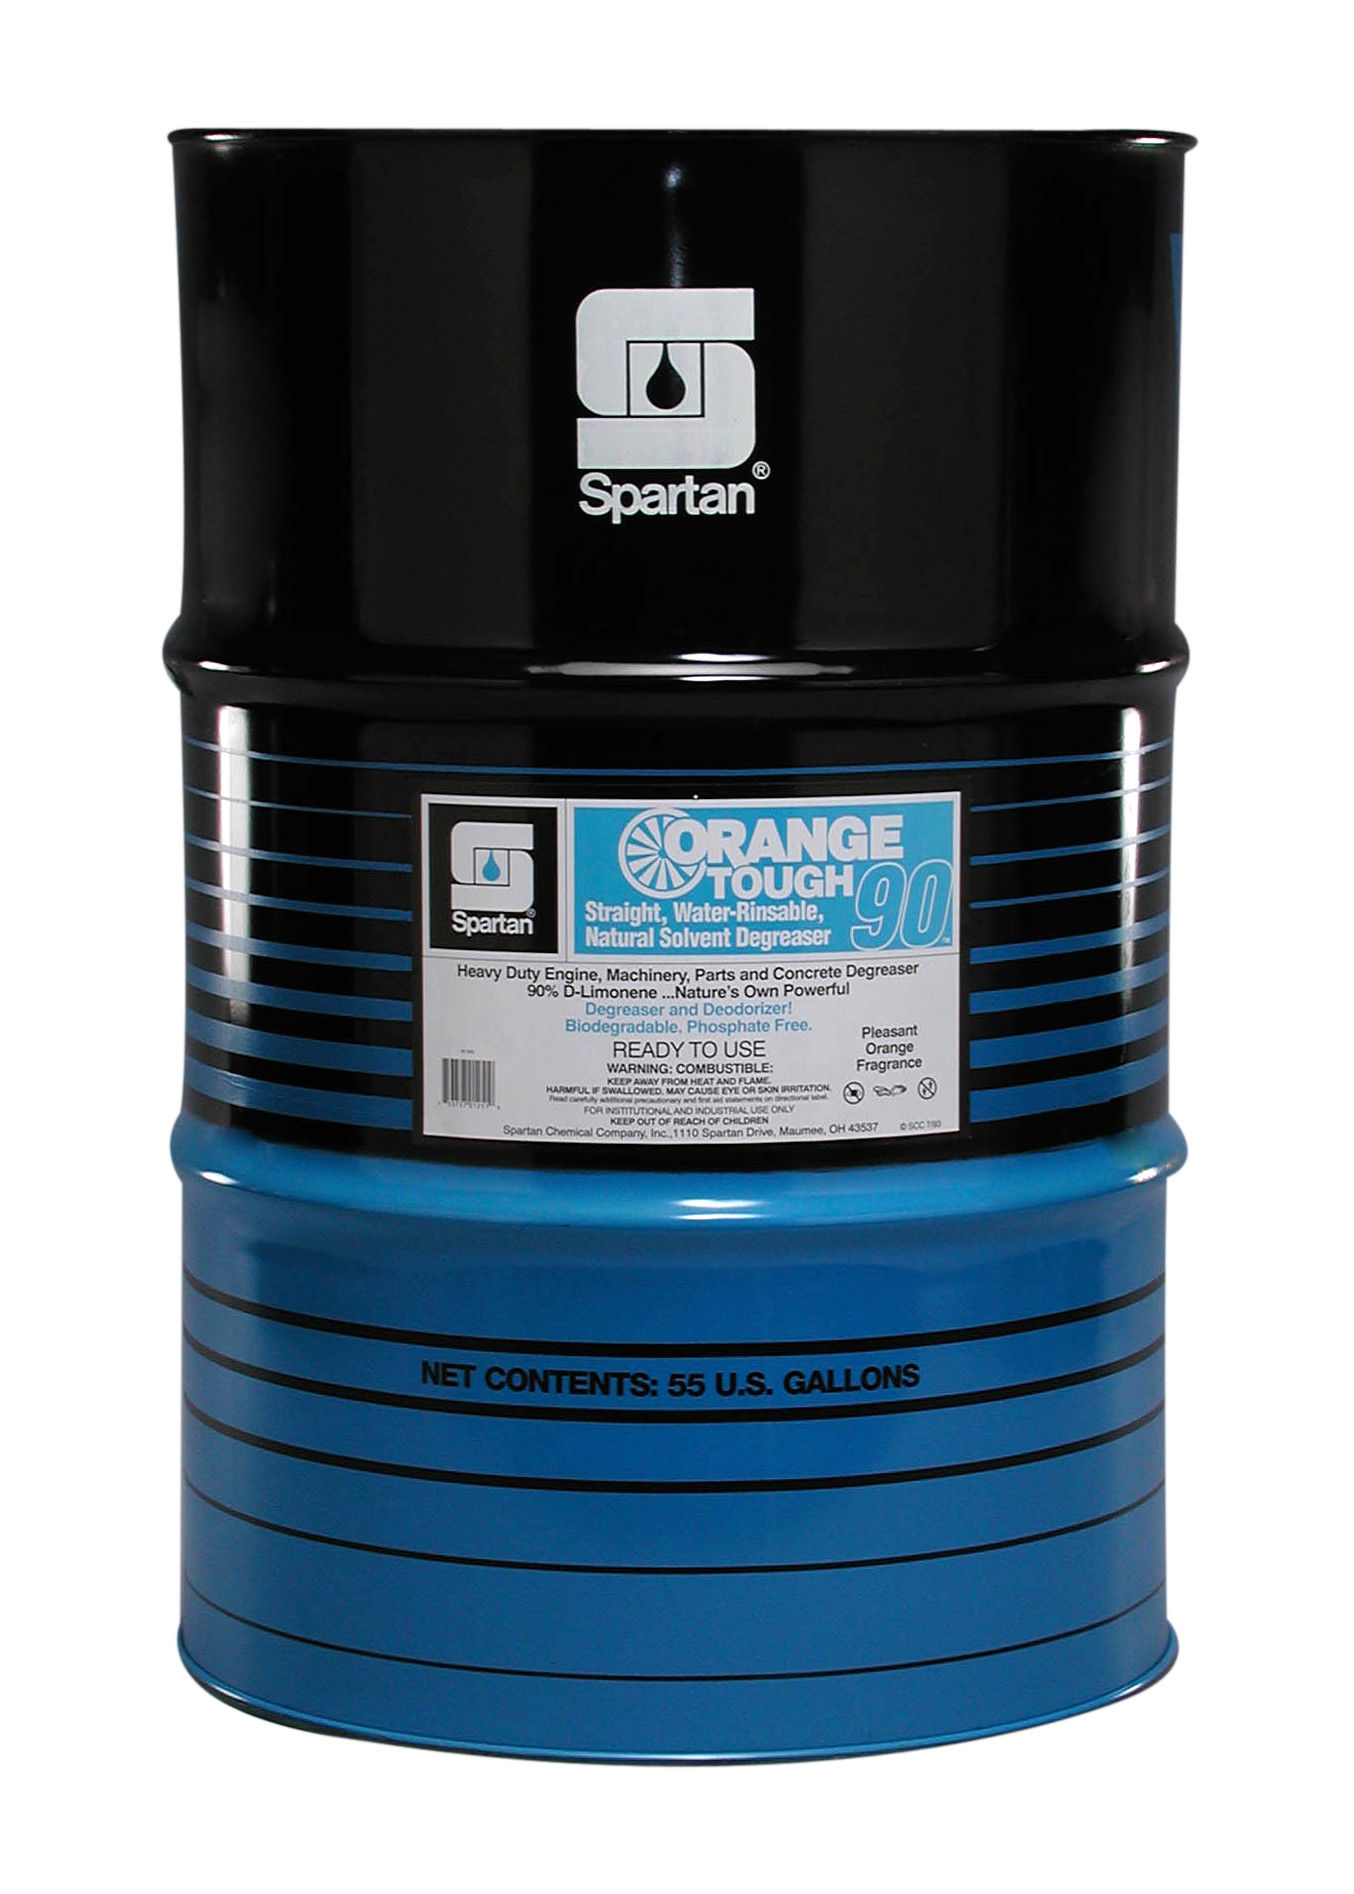 Spartan Chemical Company Orange Tough 90, 55 GAL STEEL LINED